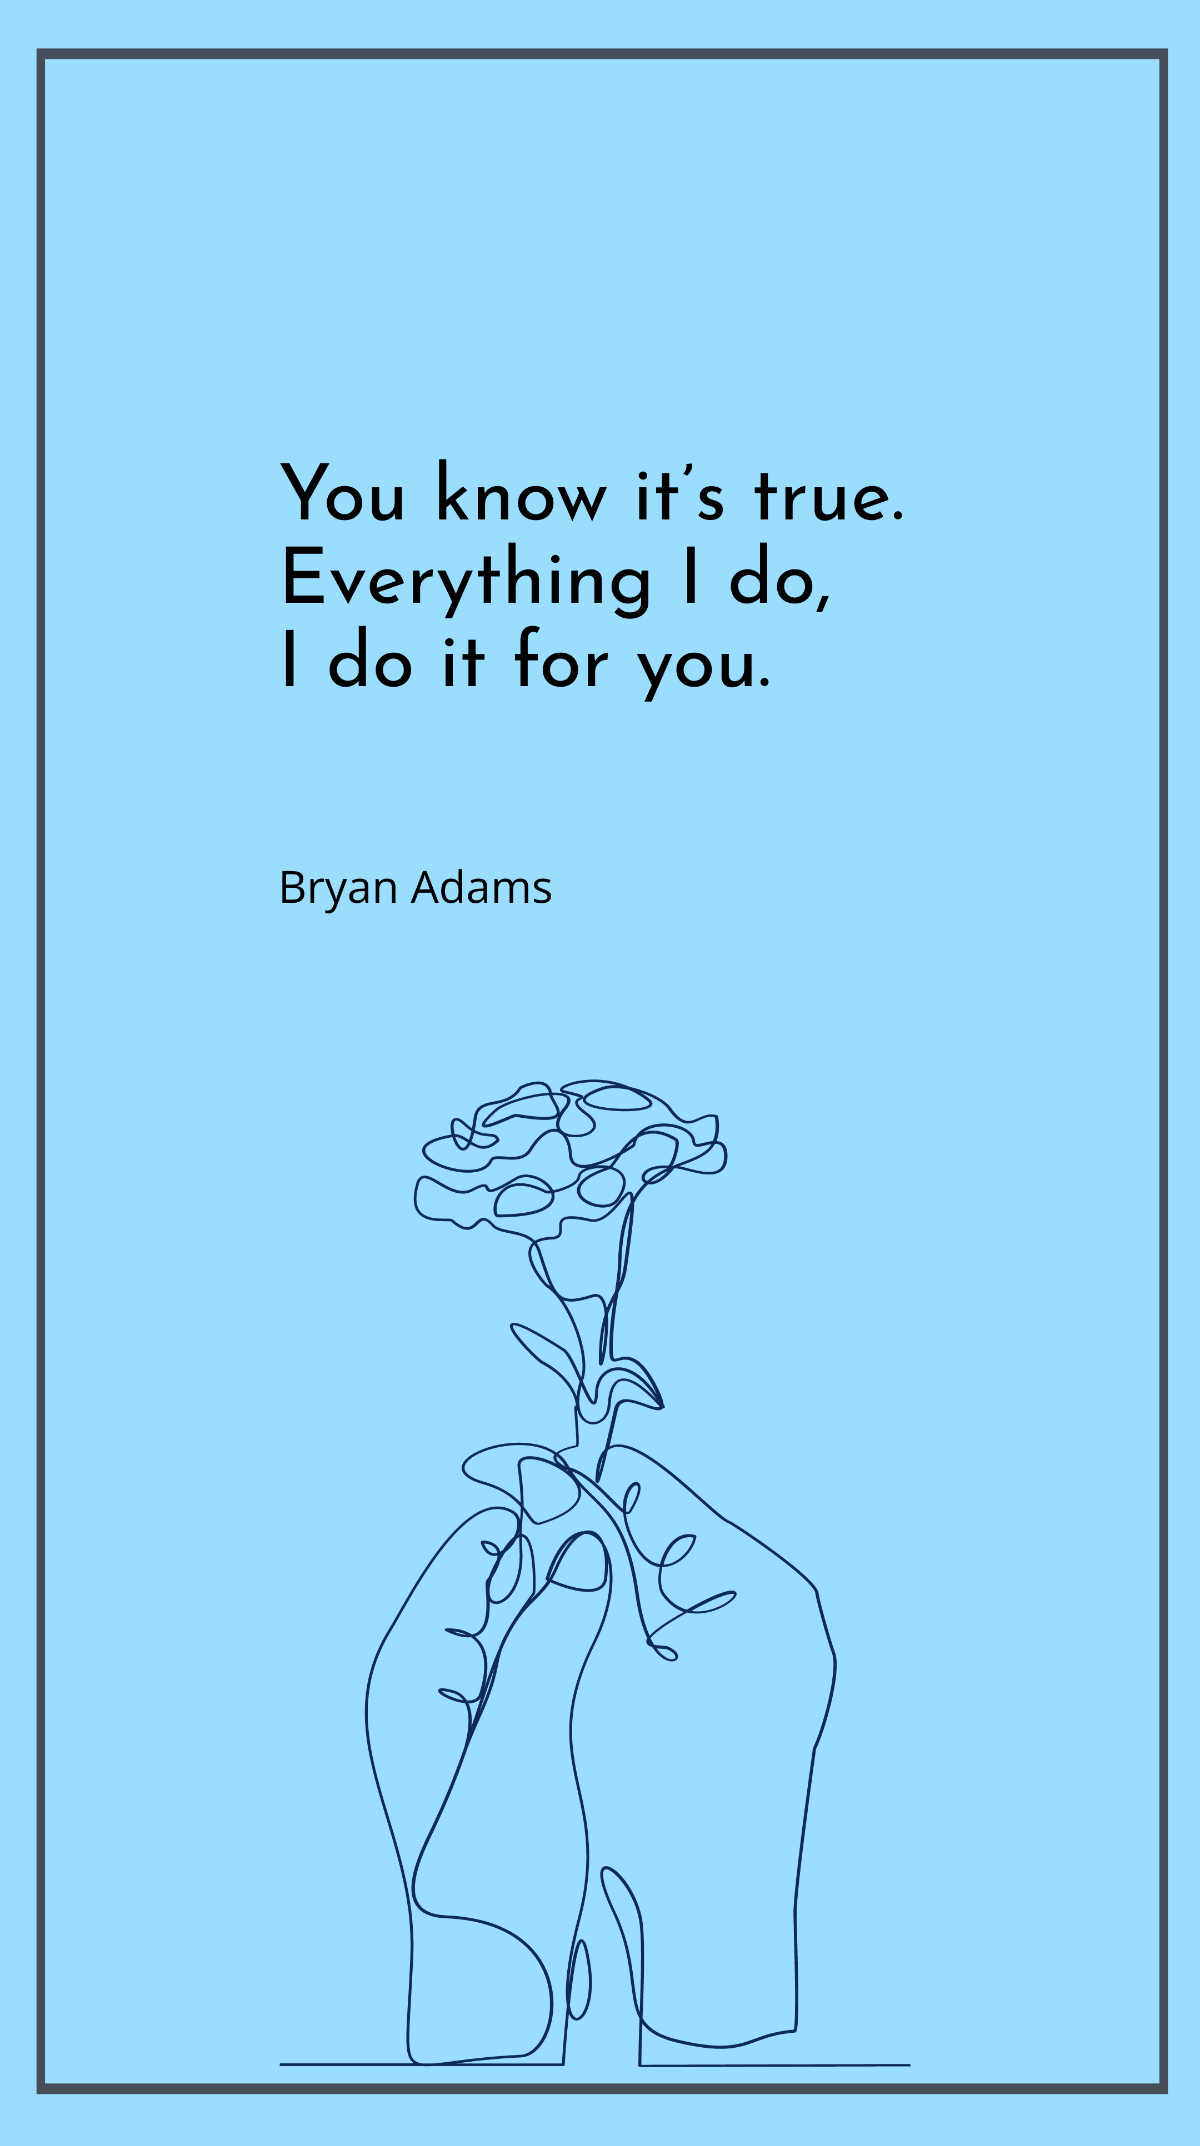 Bryan Adams - “You know it’s true. Everything I do, I do it for you.” Template